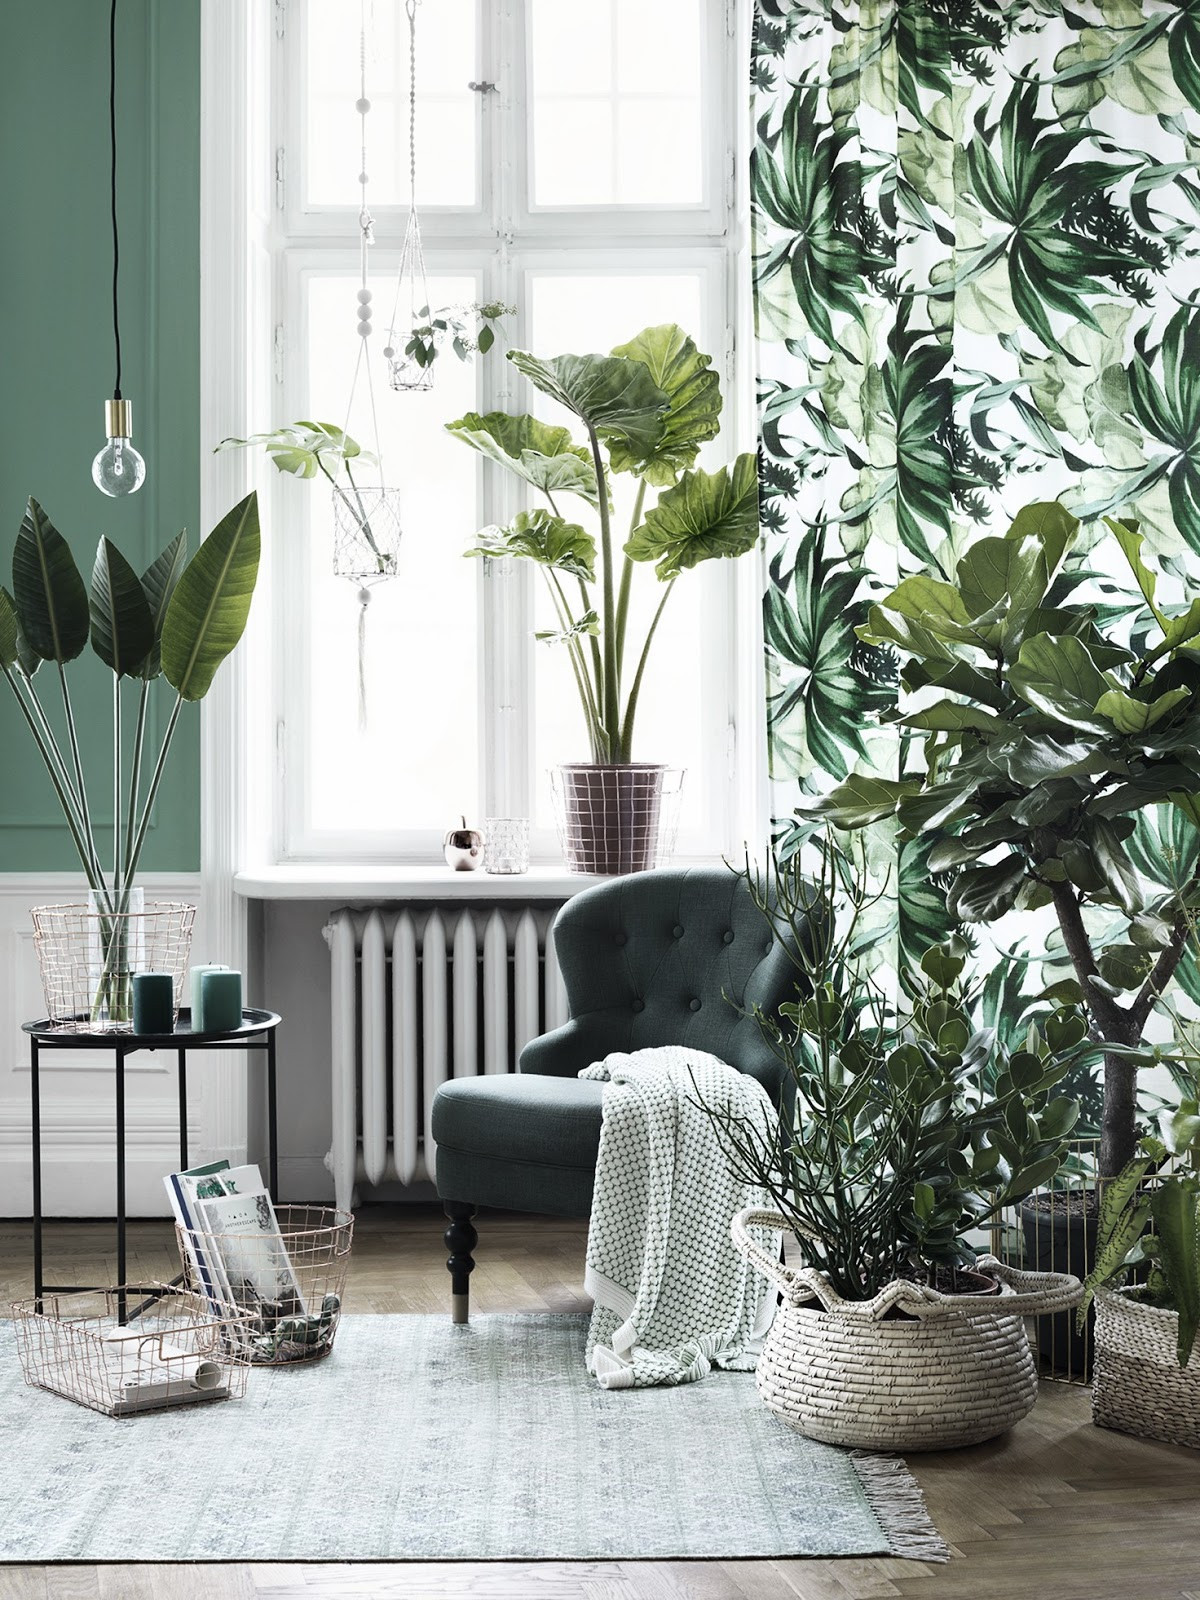 Living Room Plants Decor
 Revitalize Your Home with Lush Indoor Plants in Every Room